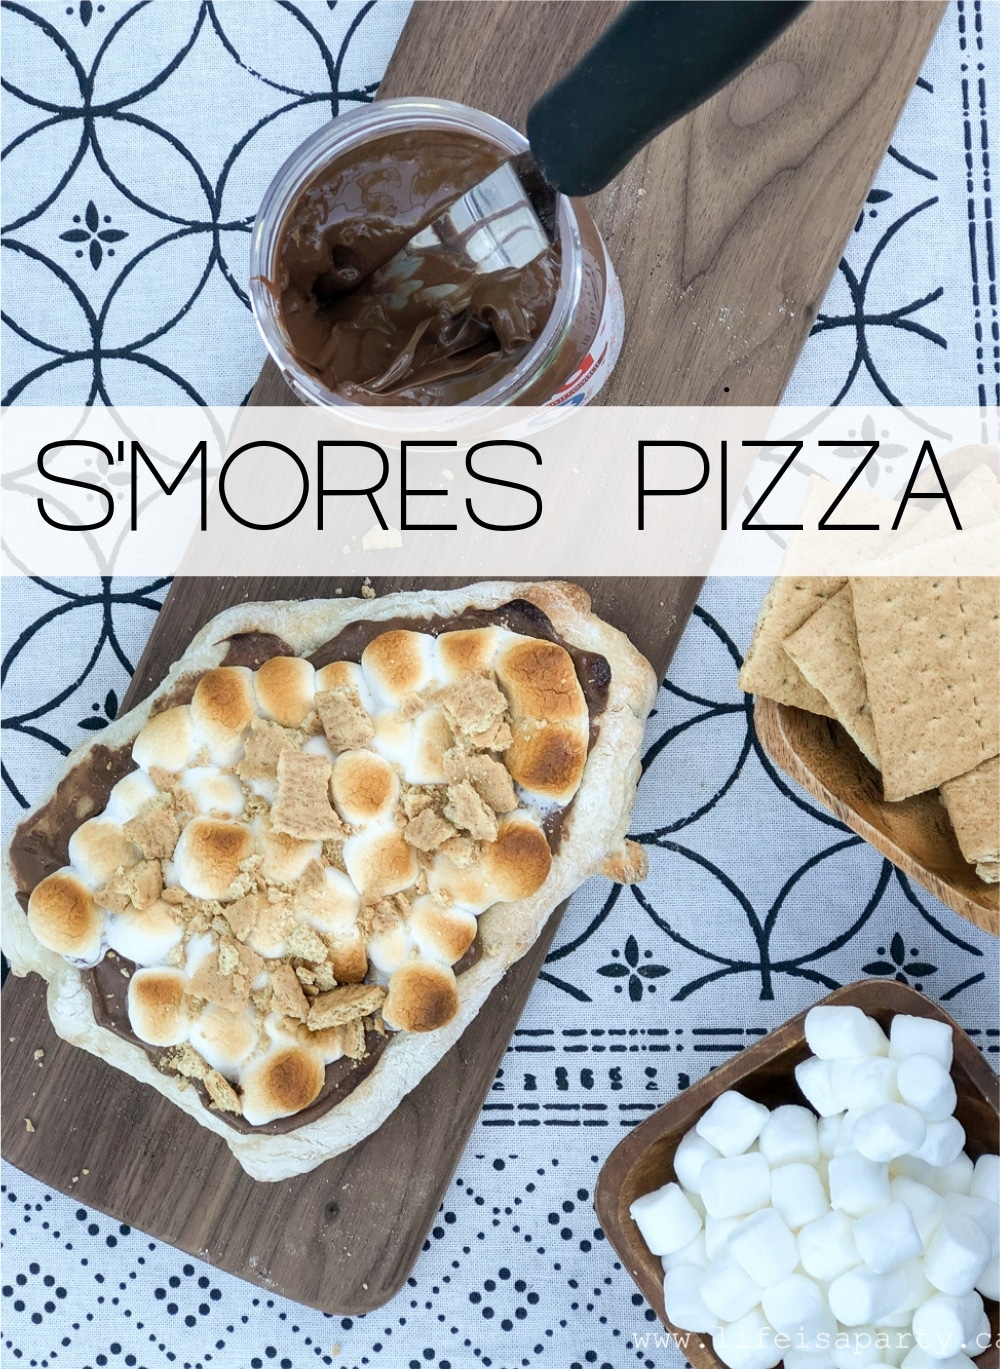 S'mores Pizza: For this smores pizza recipe use nutella, marshmallows and graham crackers on your pizza for a perfect summer treat.